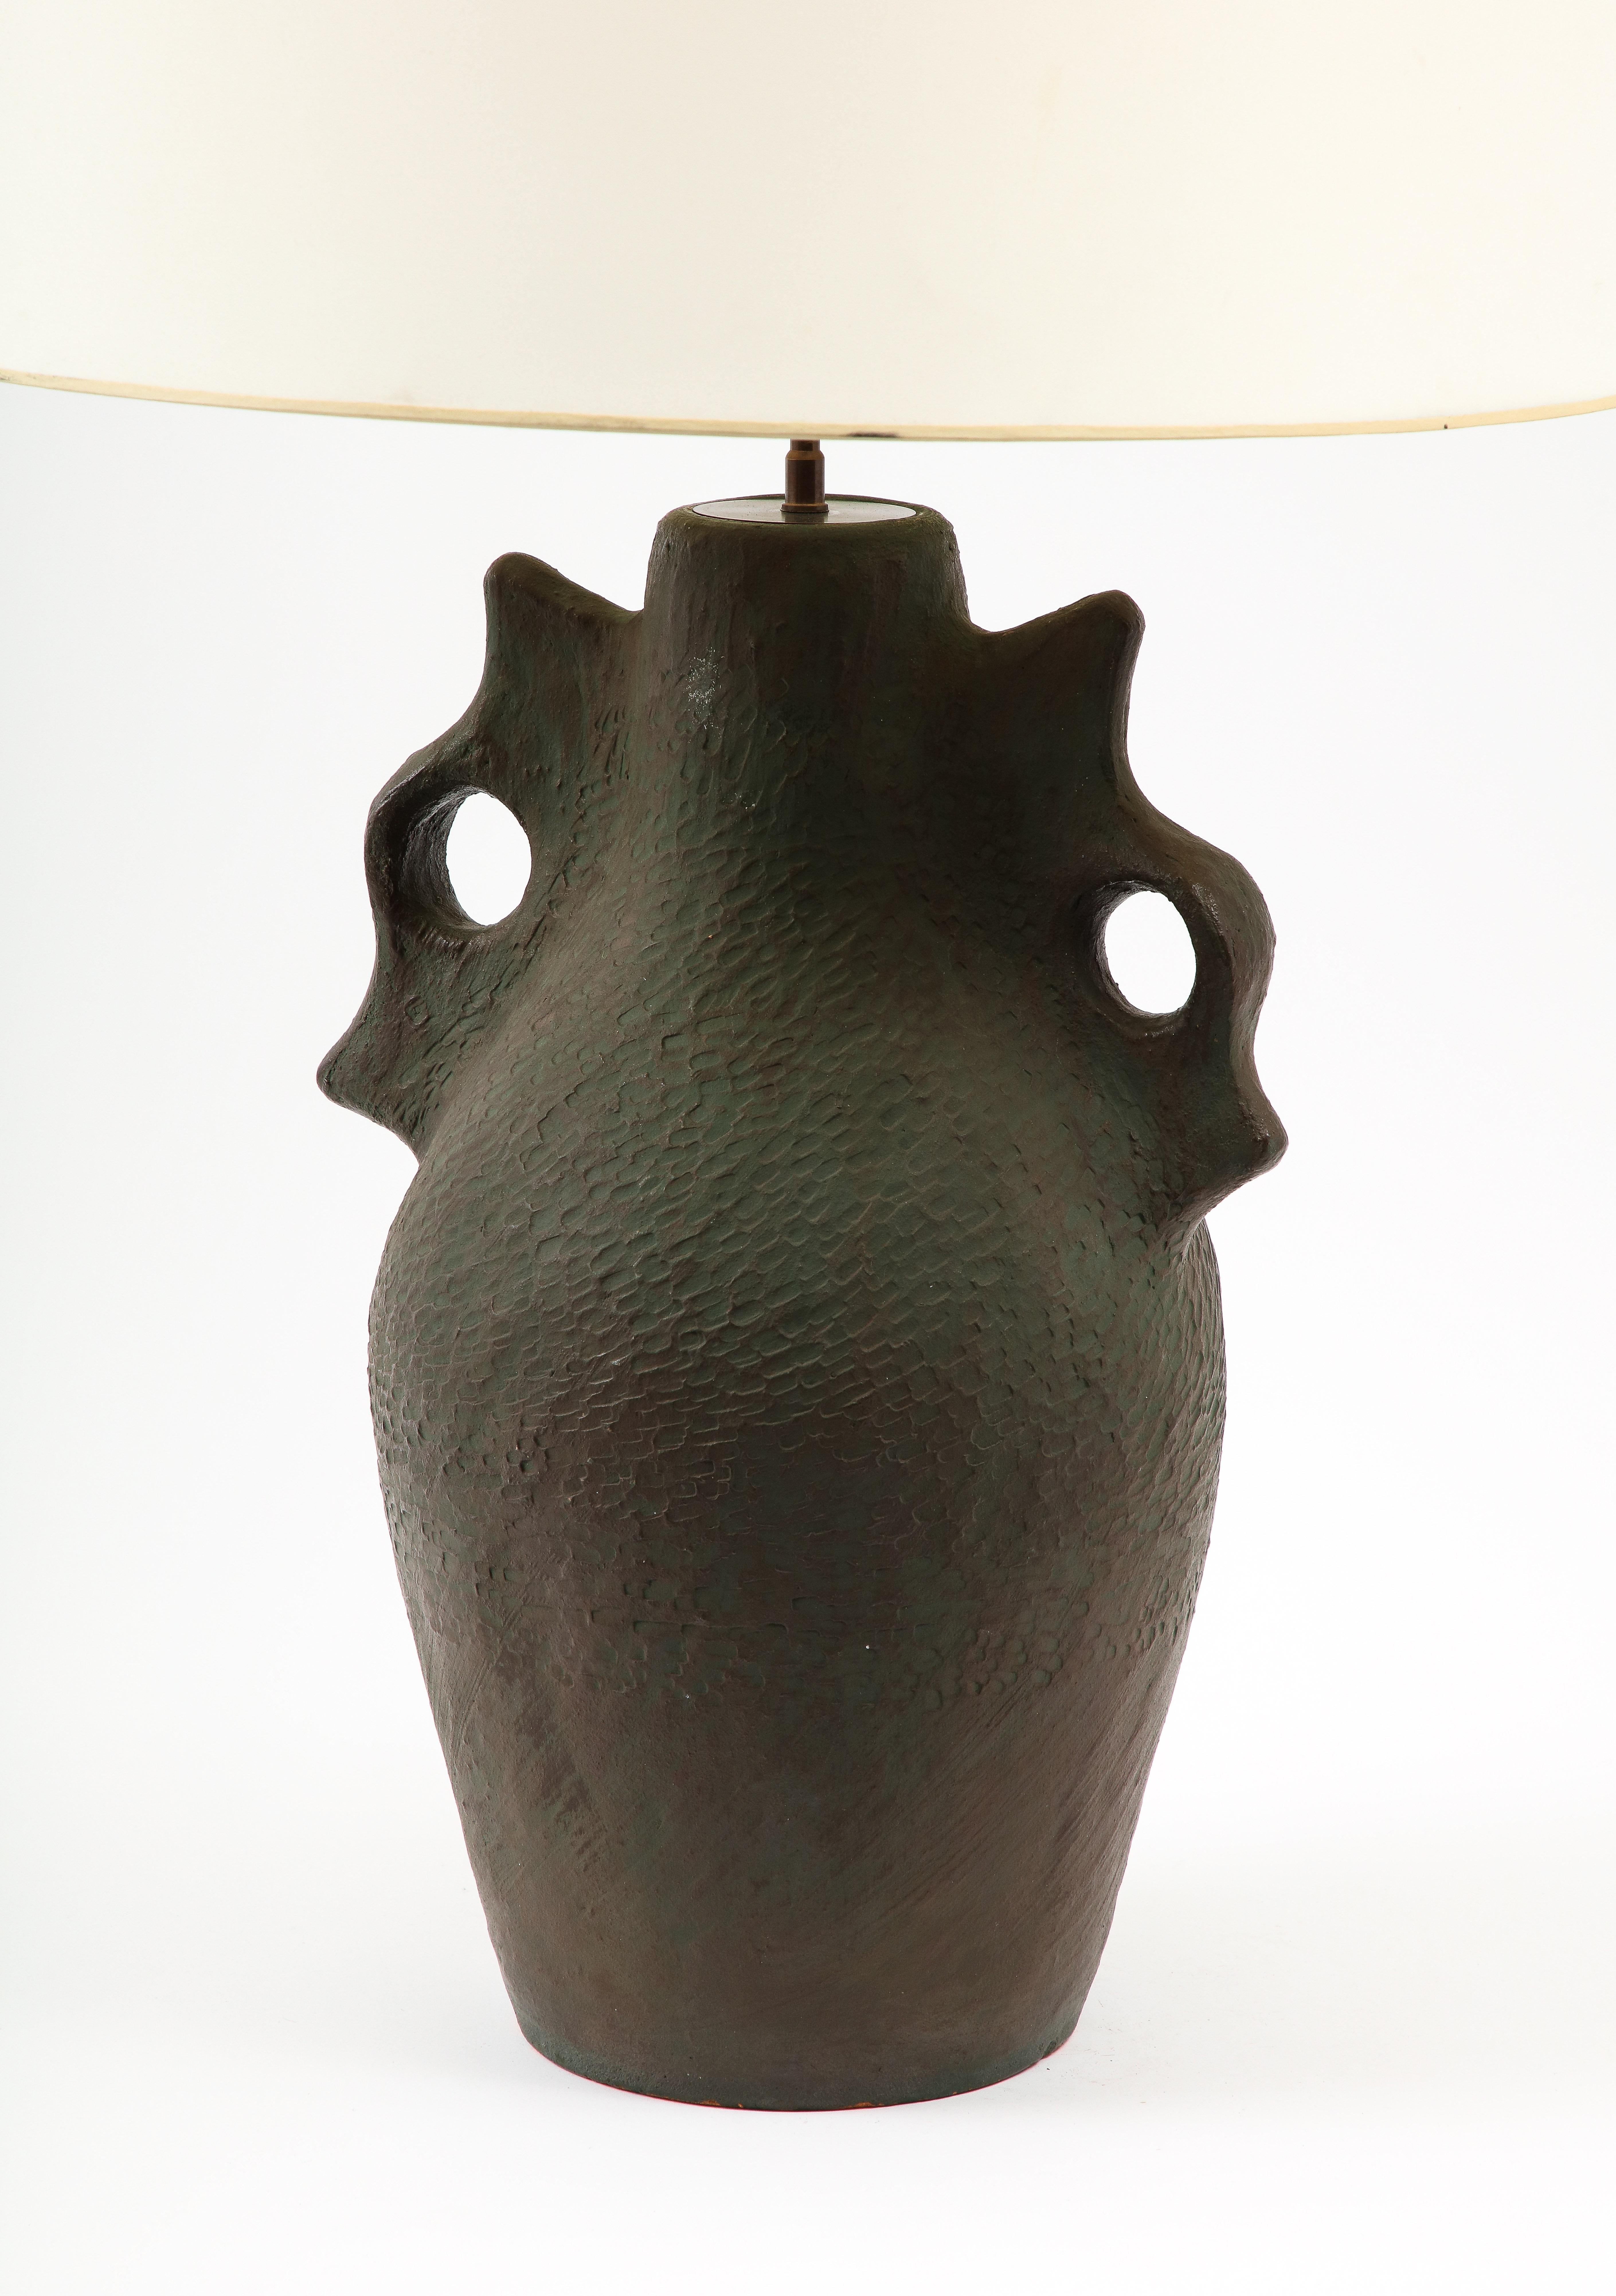 Giant terracotta lamp with a distinct glazing technique that gives it the appearance of antique bronze, the style is reminiscent of ancient Greek vessels.
The base only is 26